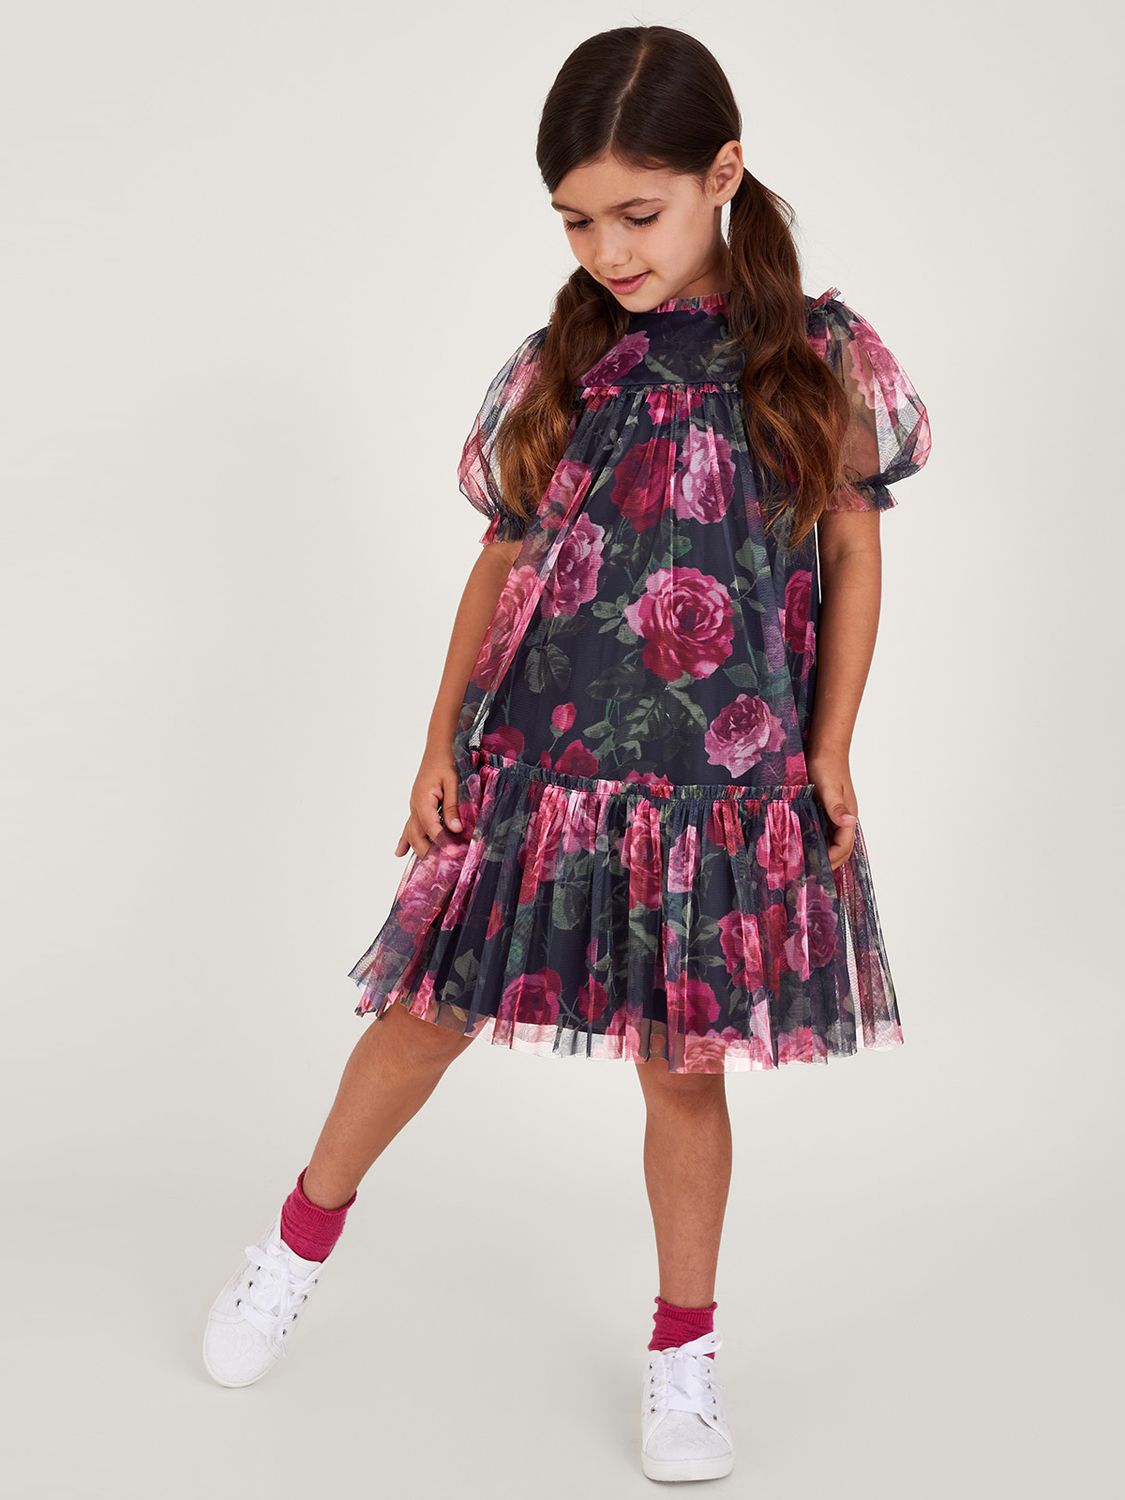 Monsoon Kids' Coco Rose Occasion Tunic Dress, Navy at John Lewis & Partners